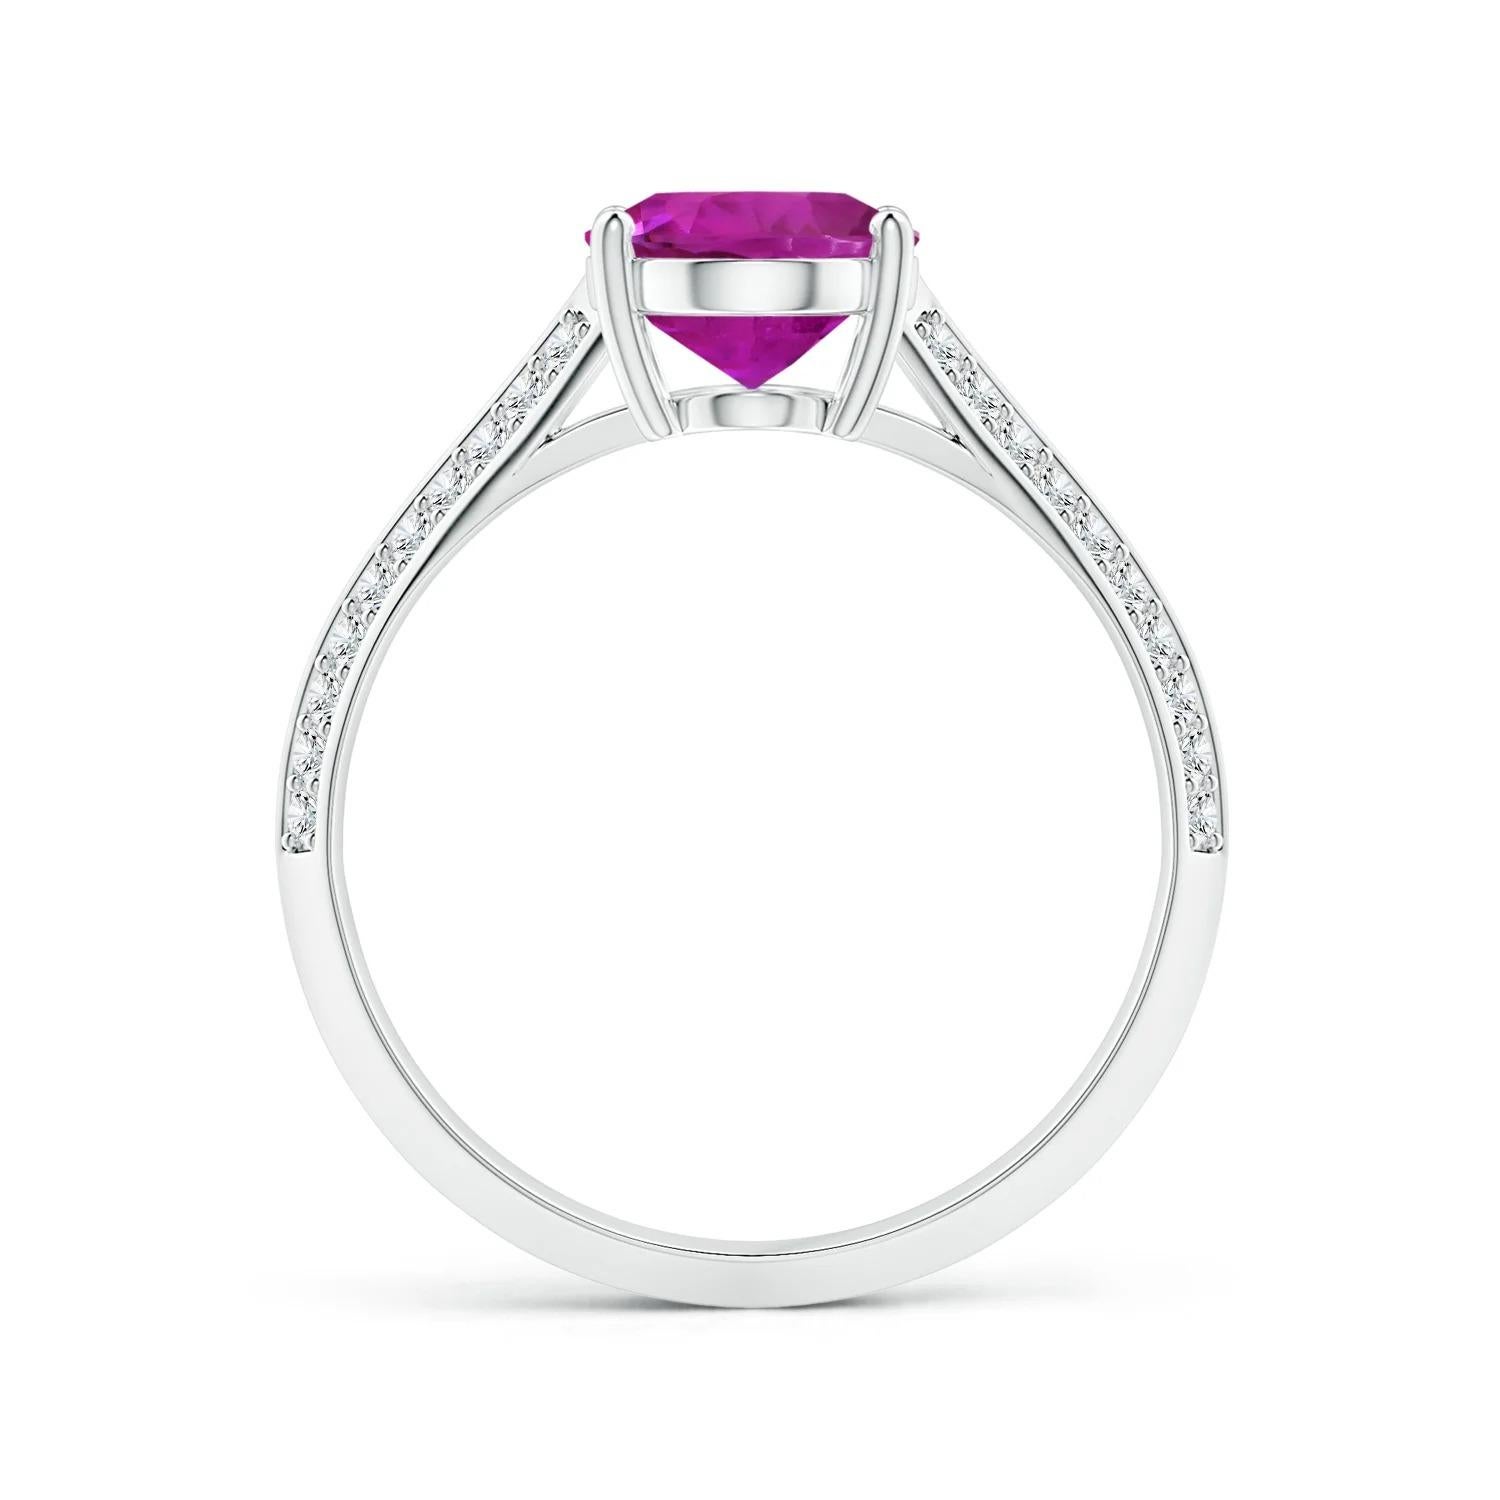 For Sale:  Angara Gia Certified Pink Sapphire Knife Edge Ring in White Gold with Diamonds 2